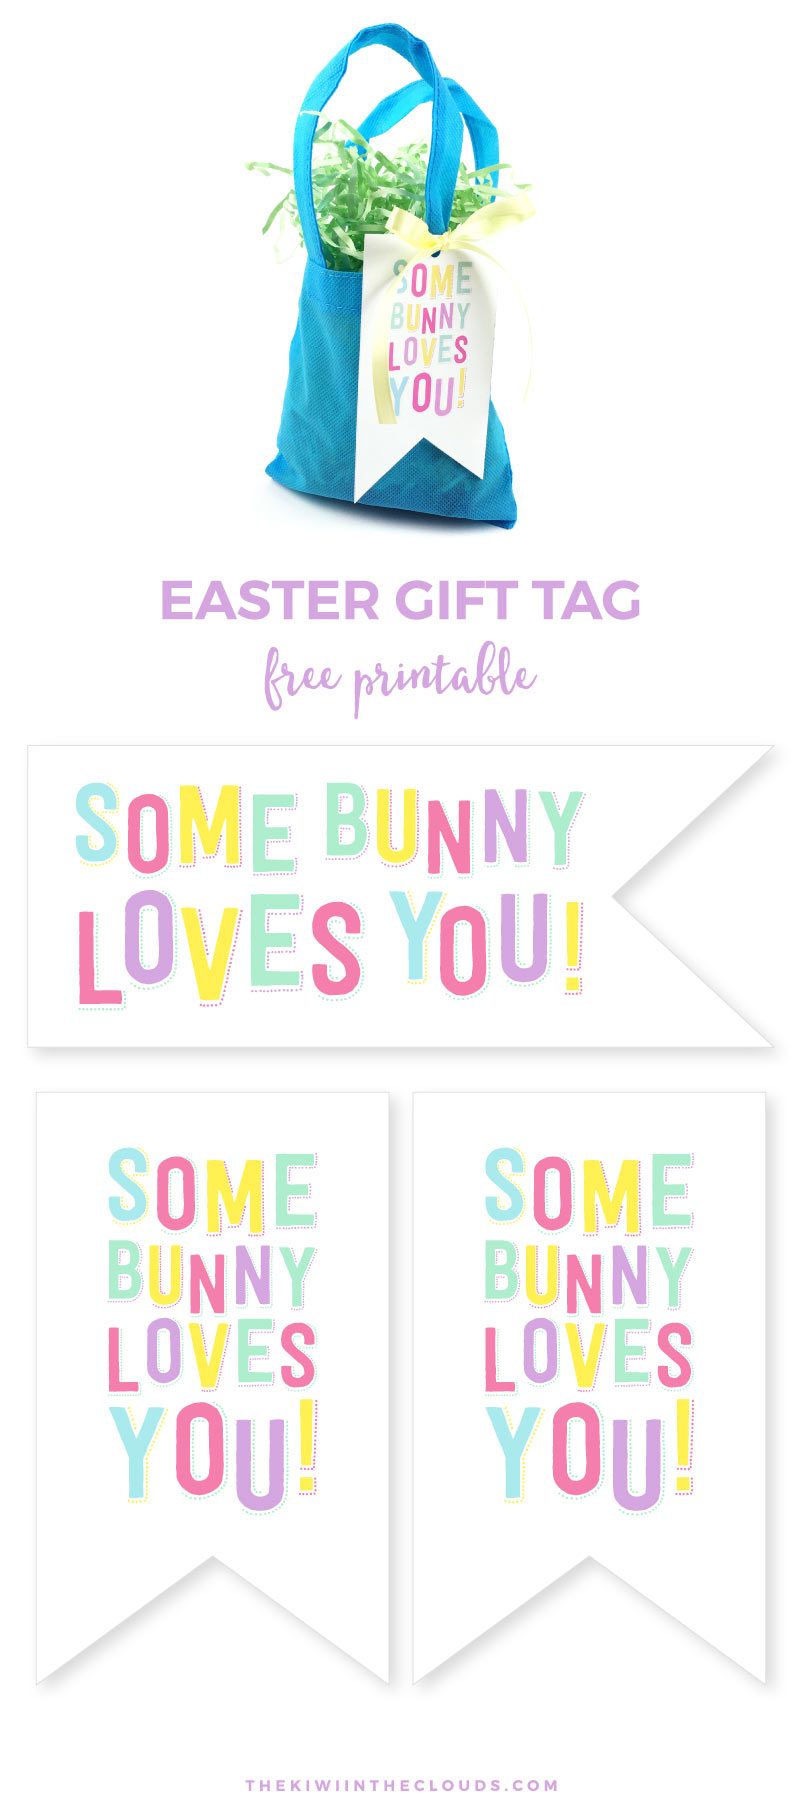 Somebunny Loves You Free Printable Easter Tag | Come grab this cute Easter gift tag and attach it to your Easter gift for an easy, pulled together look. Click through to download now. 